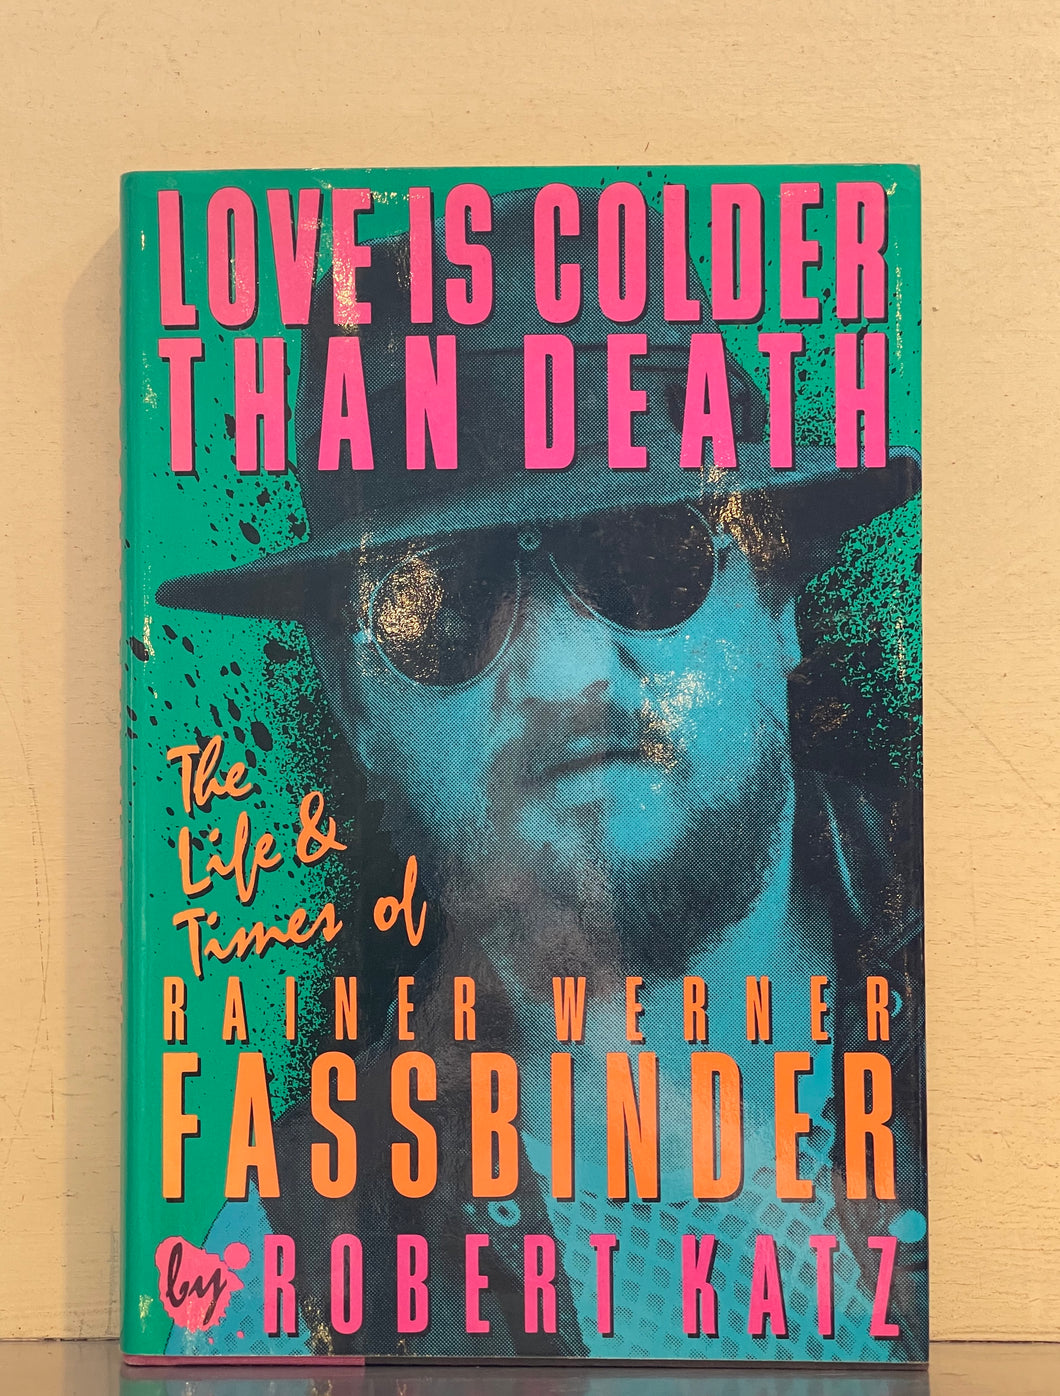 Love Is Colder Than Death: The Life and Times of Rainer Werner Fassbinder